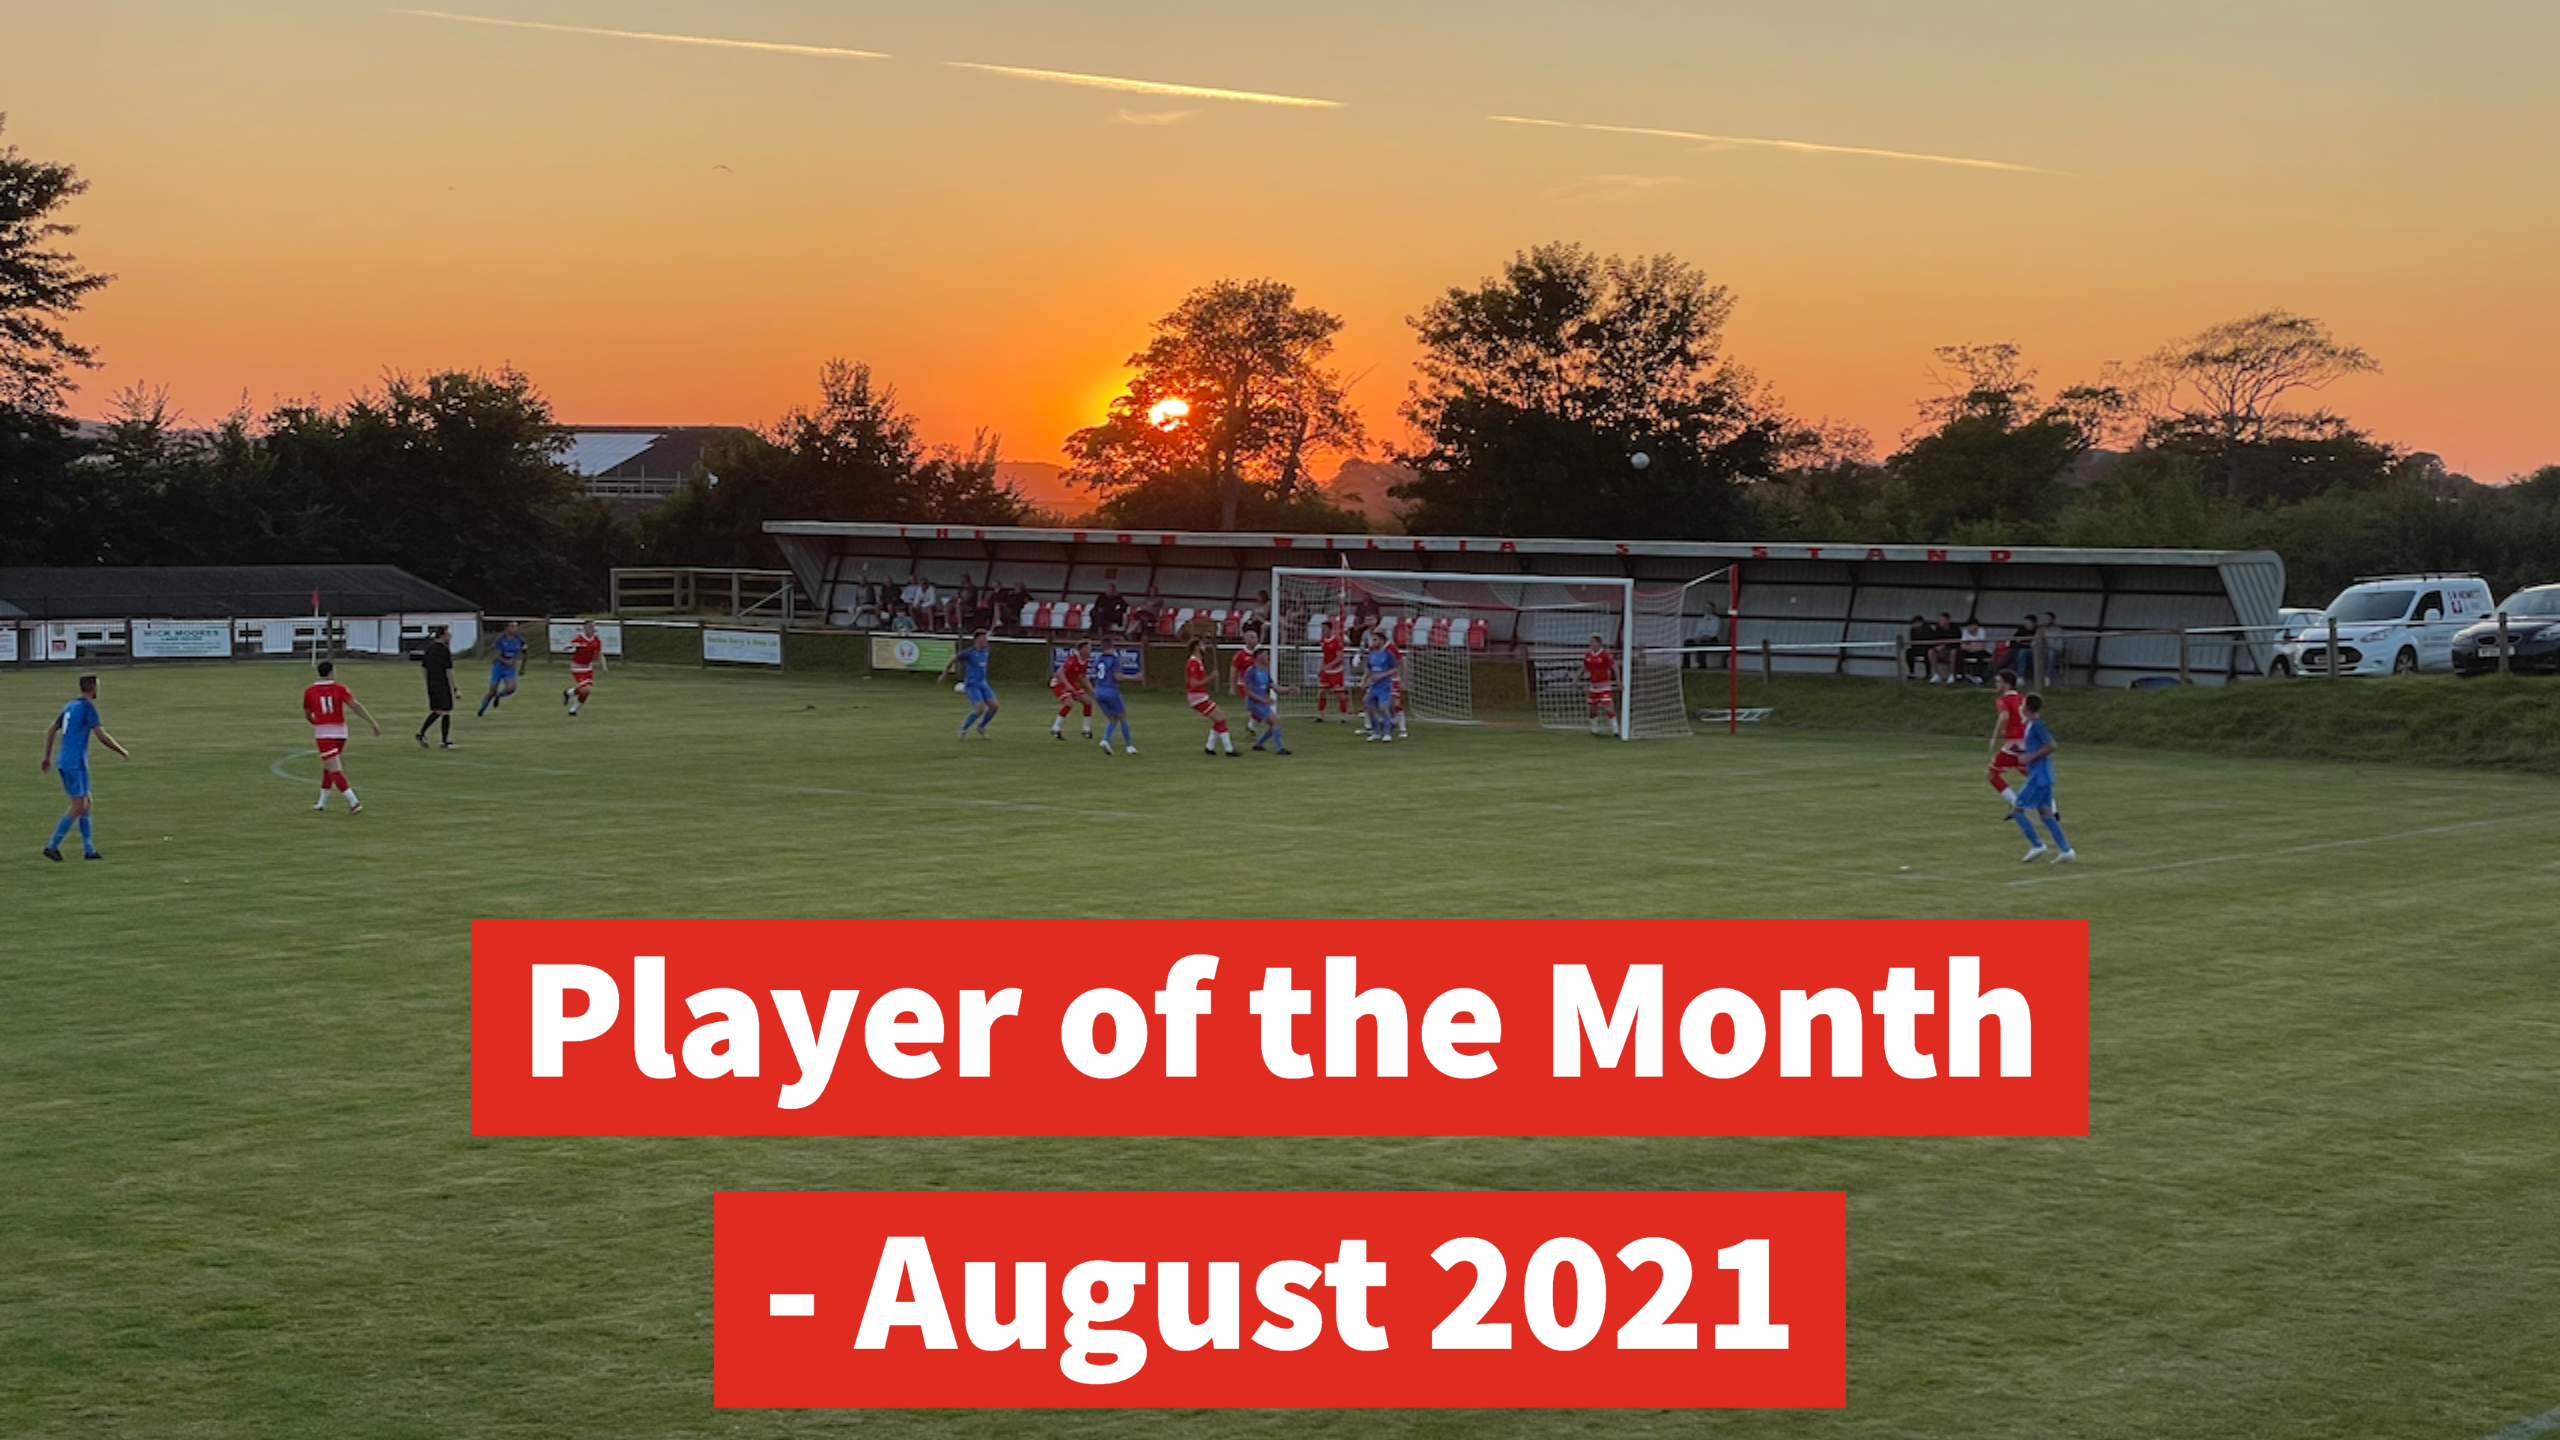 Player of the Month - August 2021